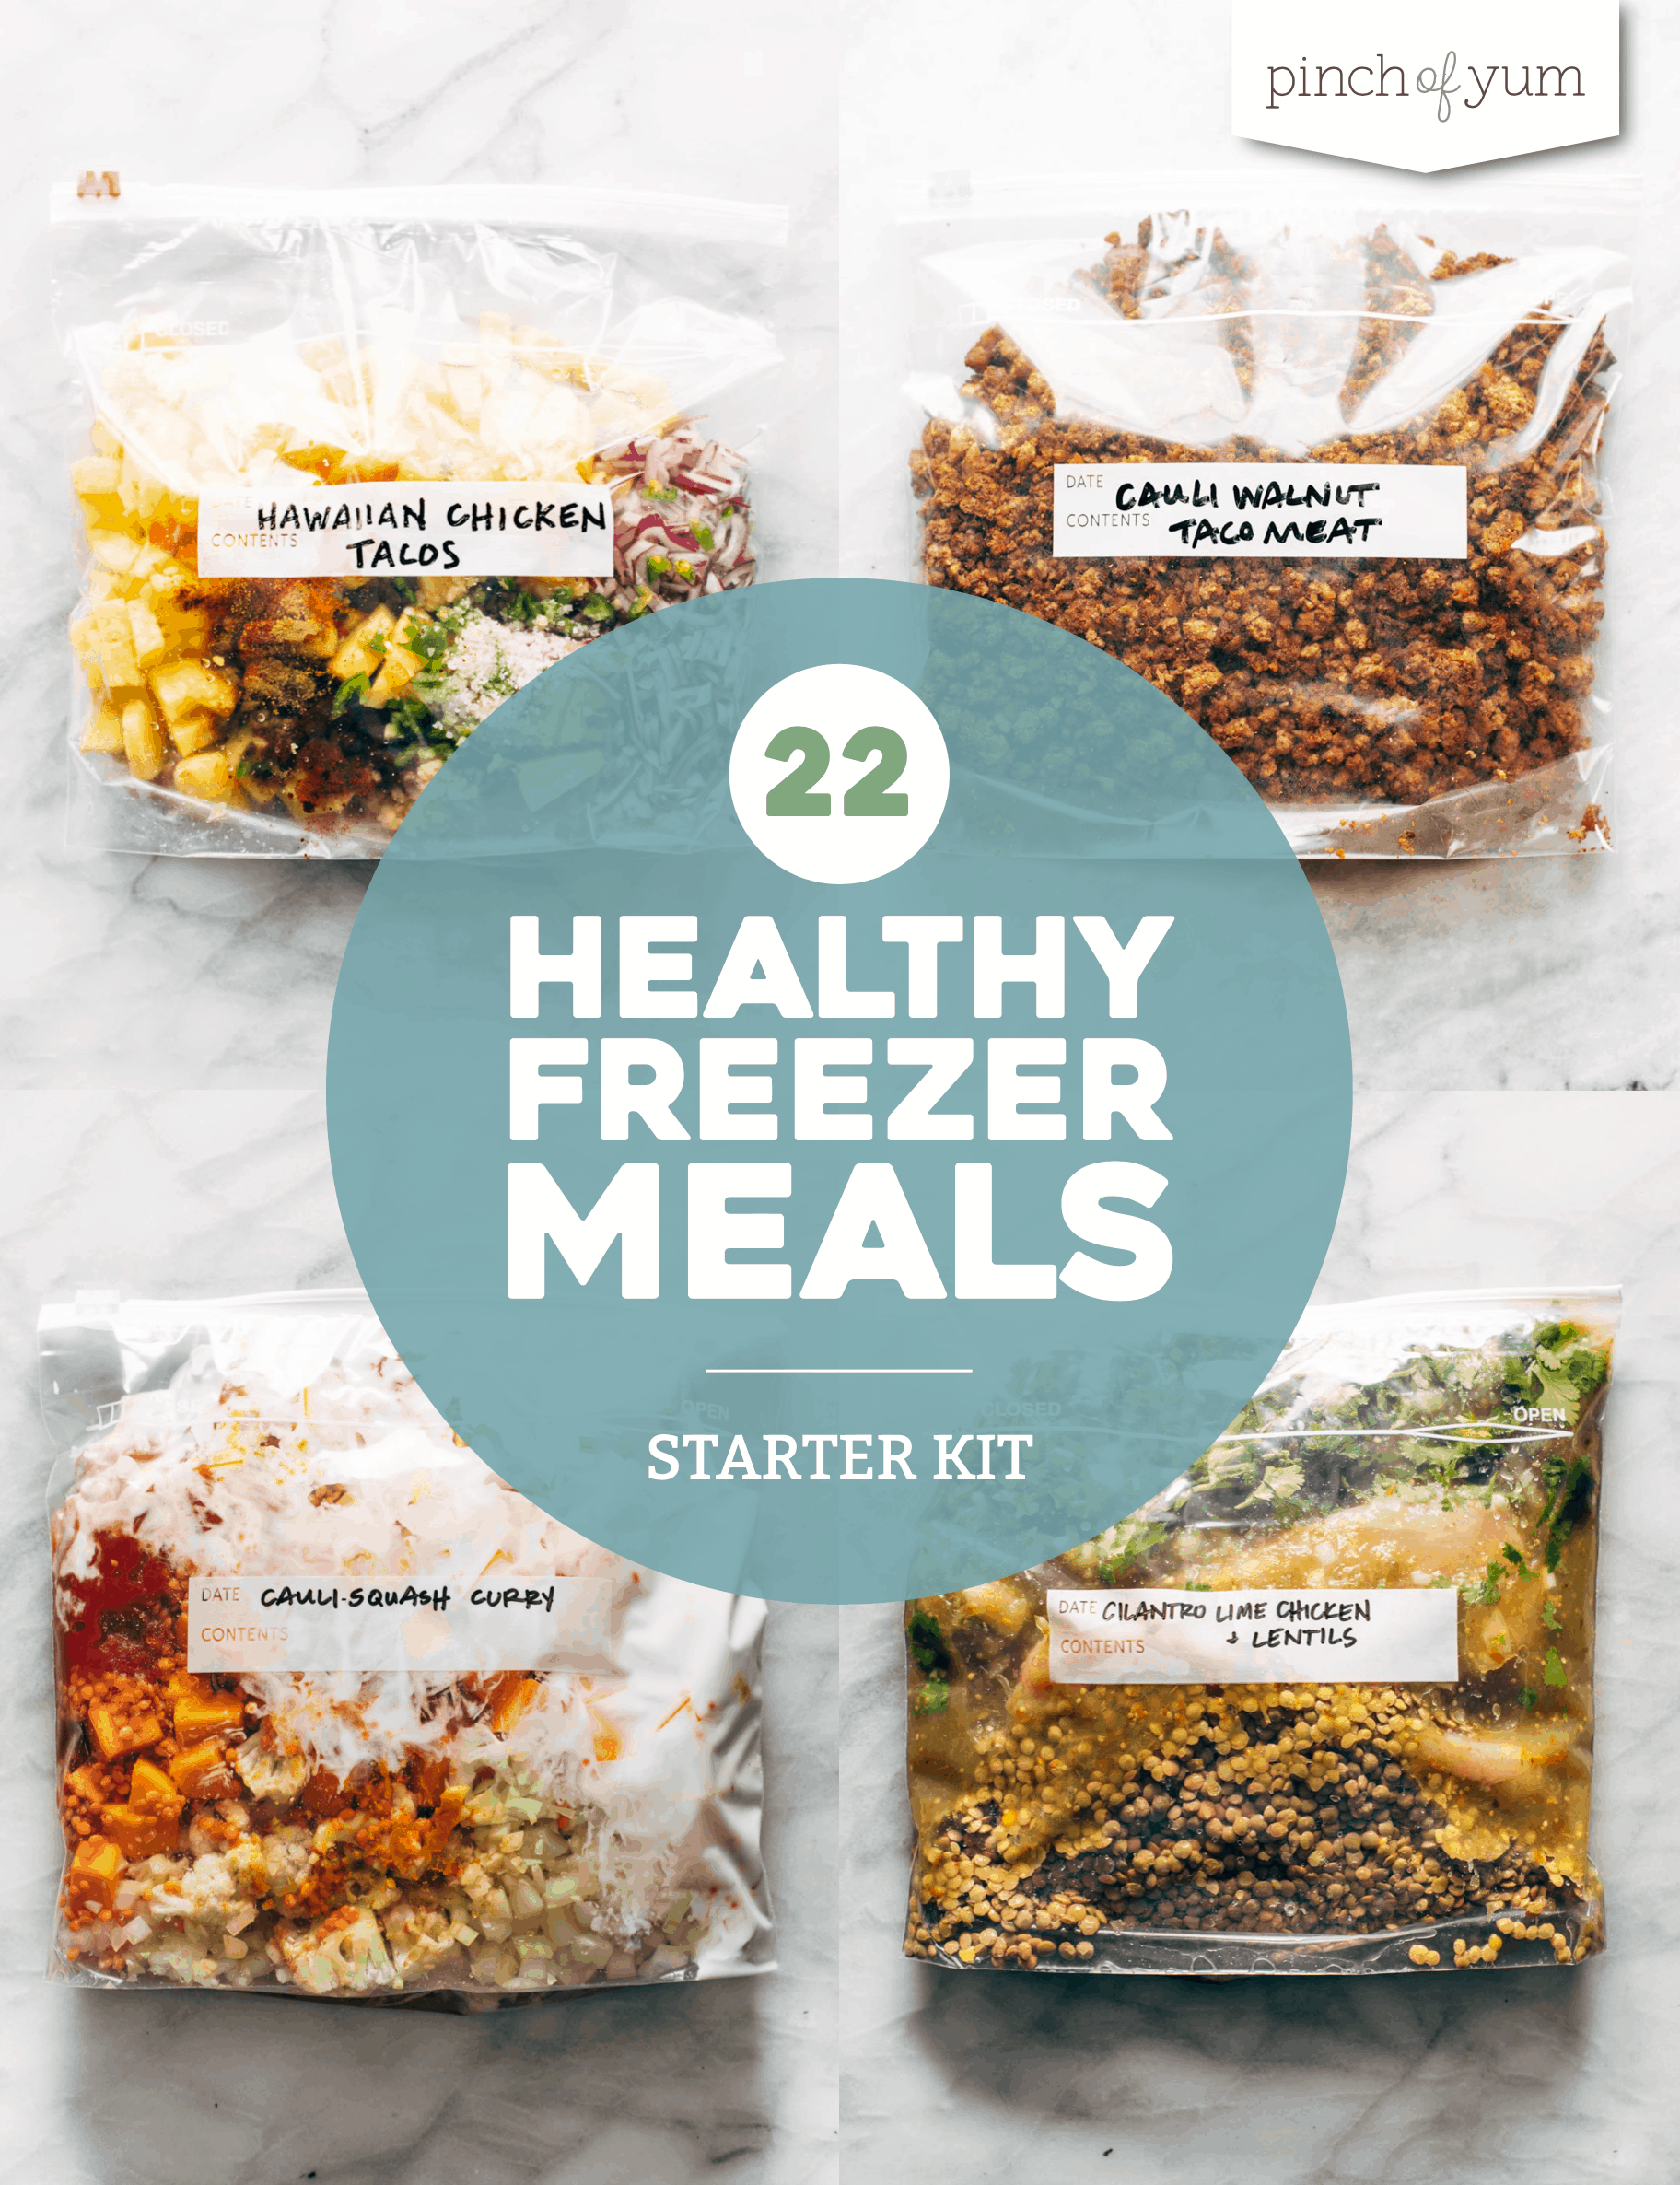 Bags of healthy foods set up as freezer meals.